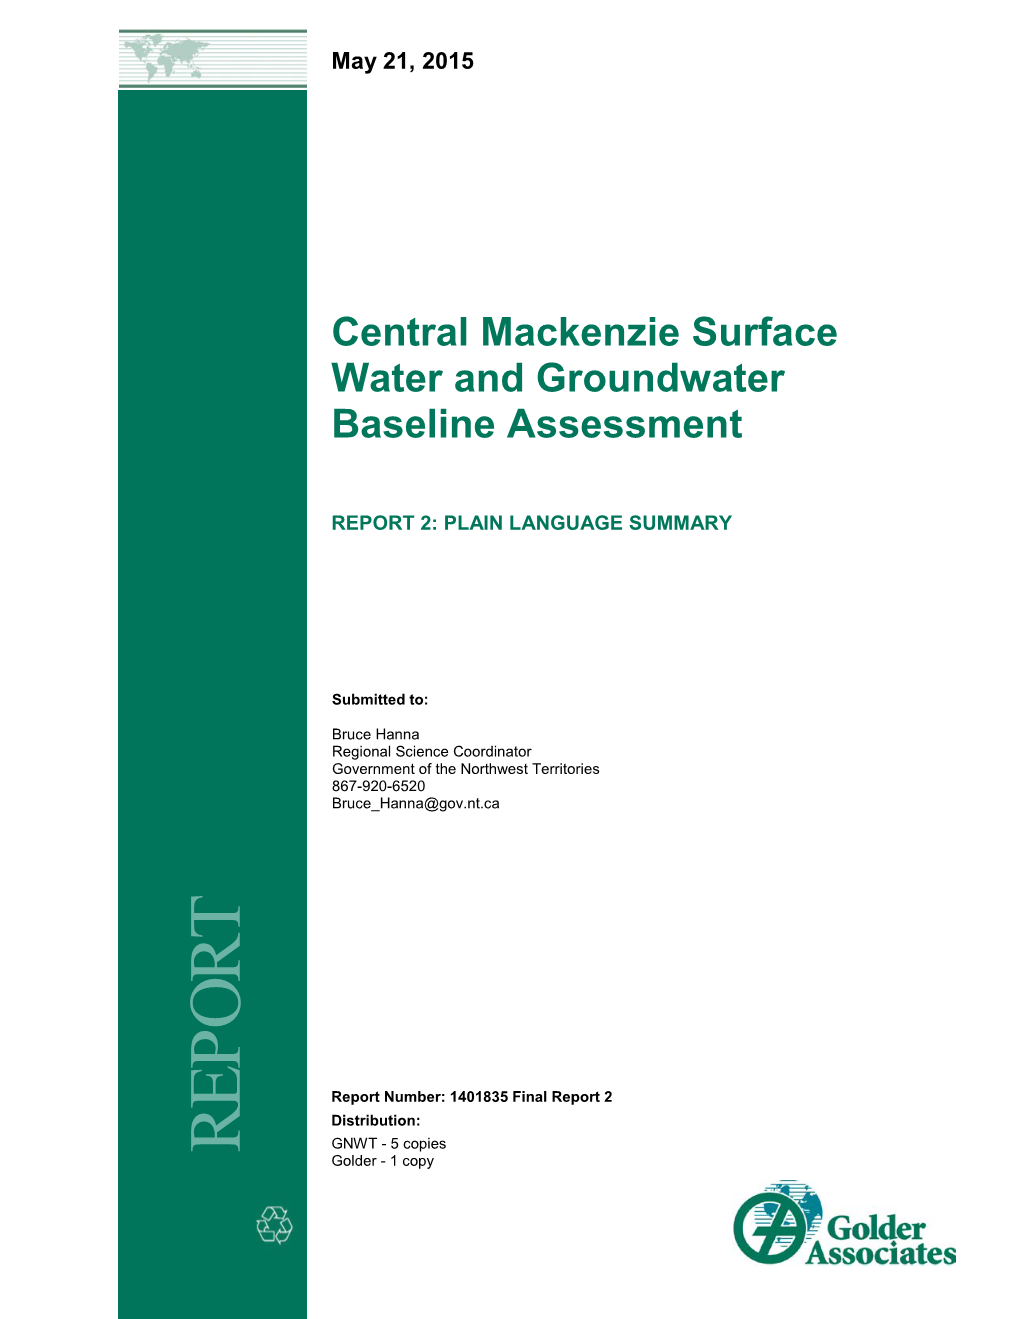 Central Mackenzie Surface Water and Groundwater Baseline Assessment